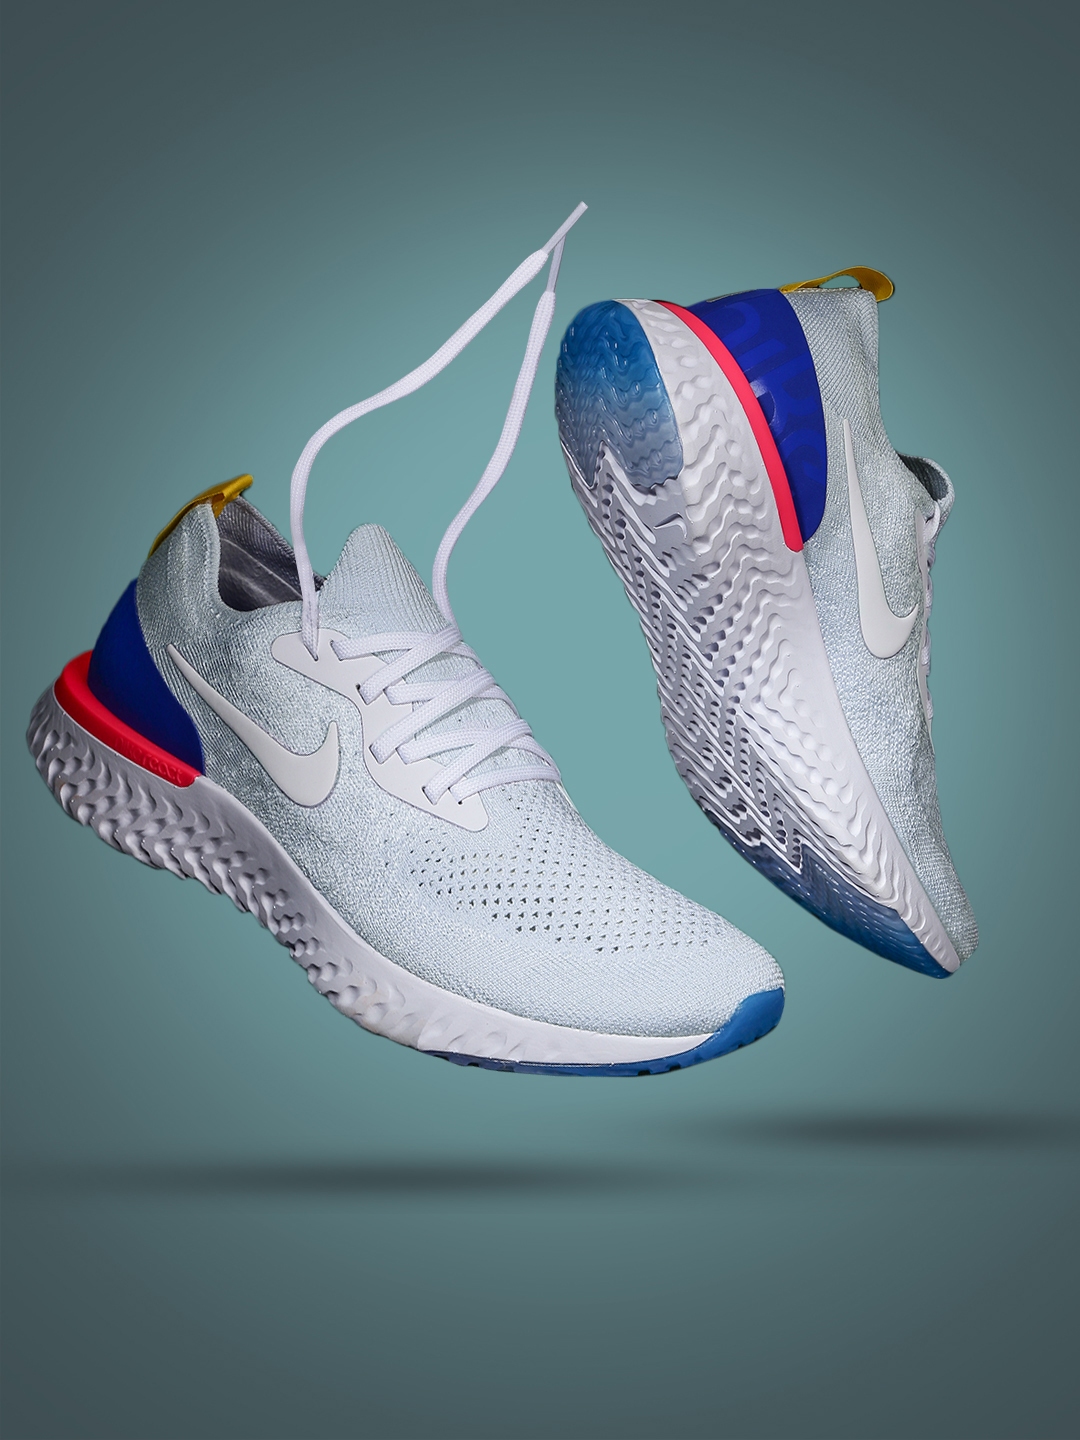 White EPIC REACT FLYKNIT Running Shoes 